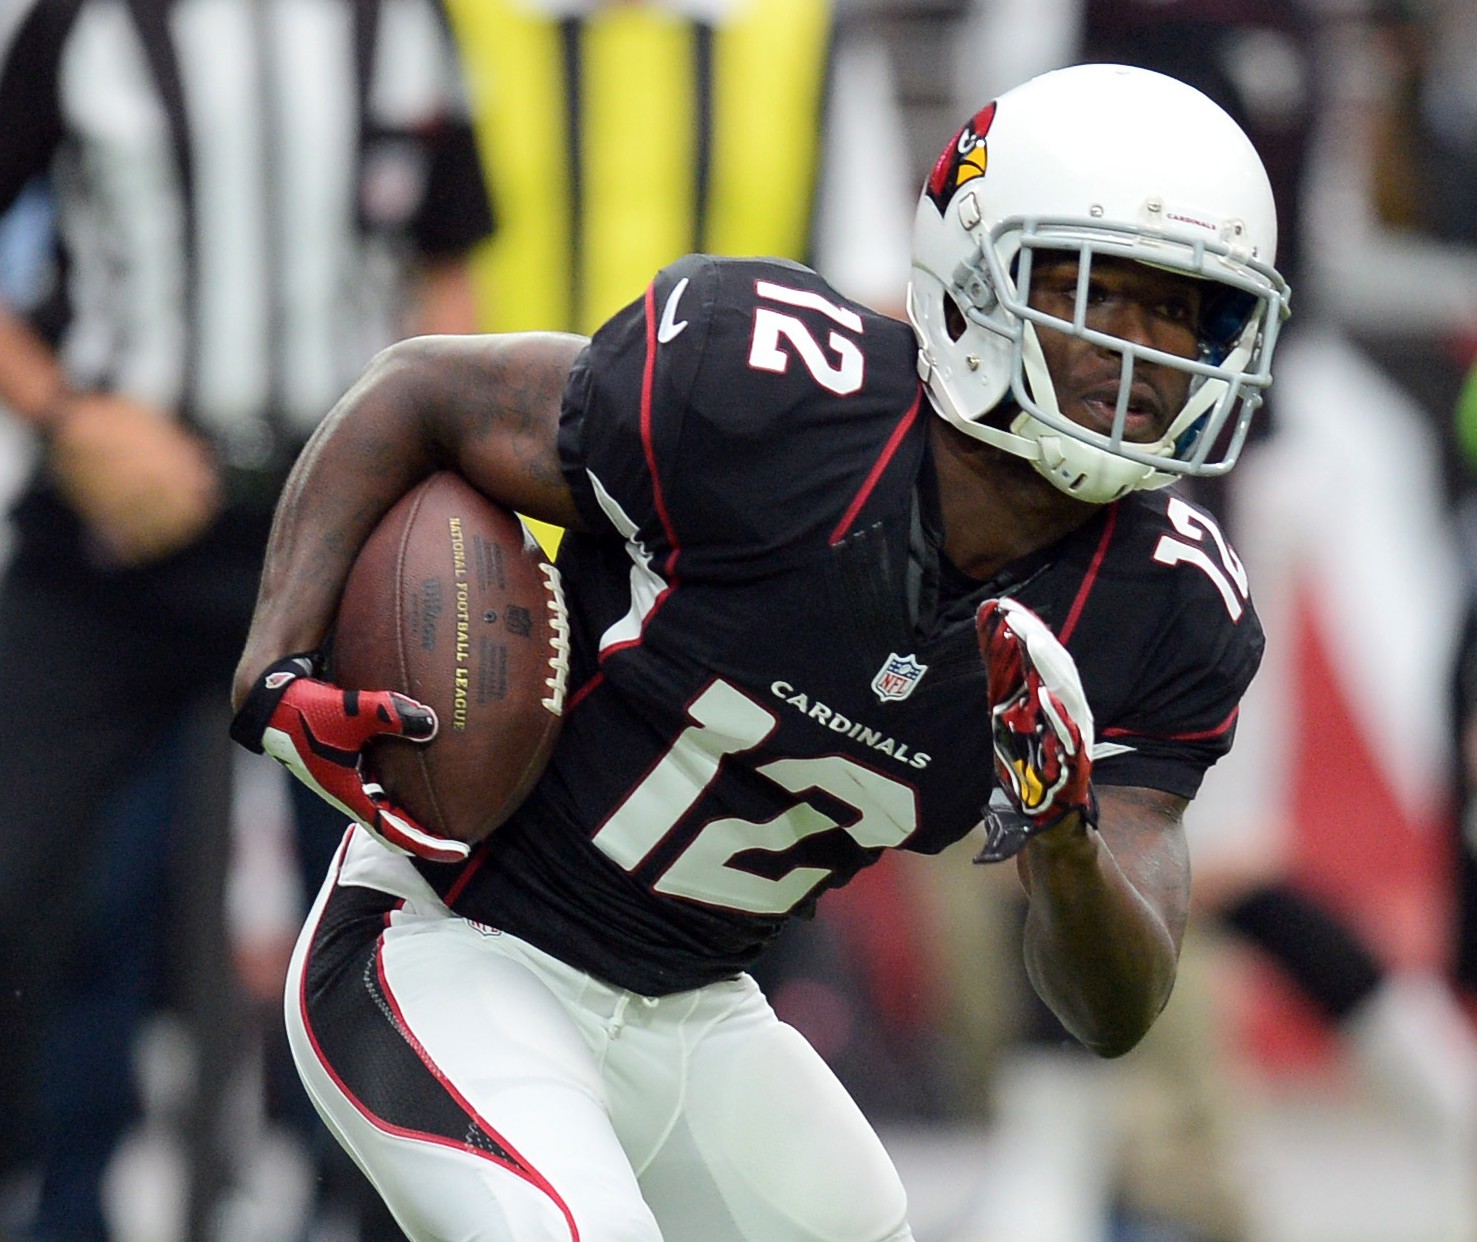 Rookie receiver John Brown caught two TD passes Sunday. Joe Camporeale, USA TODAY Sports